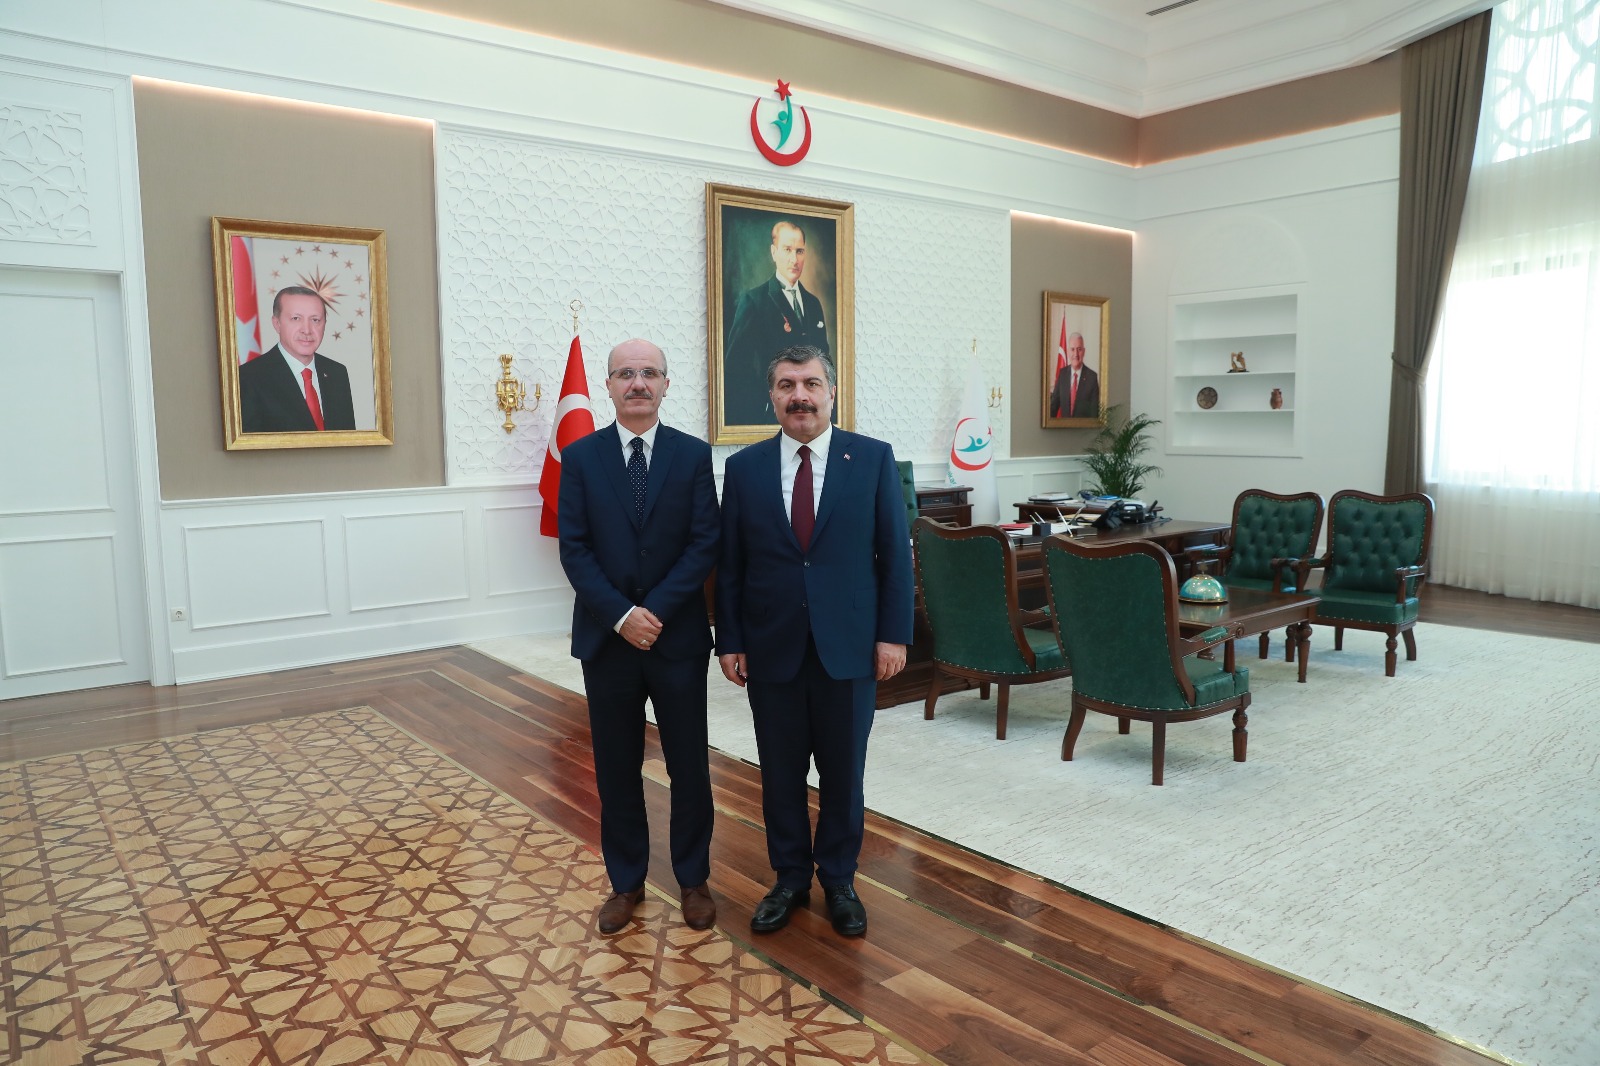 Our Rector visited the Minister of Health